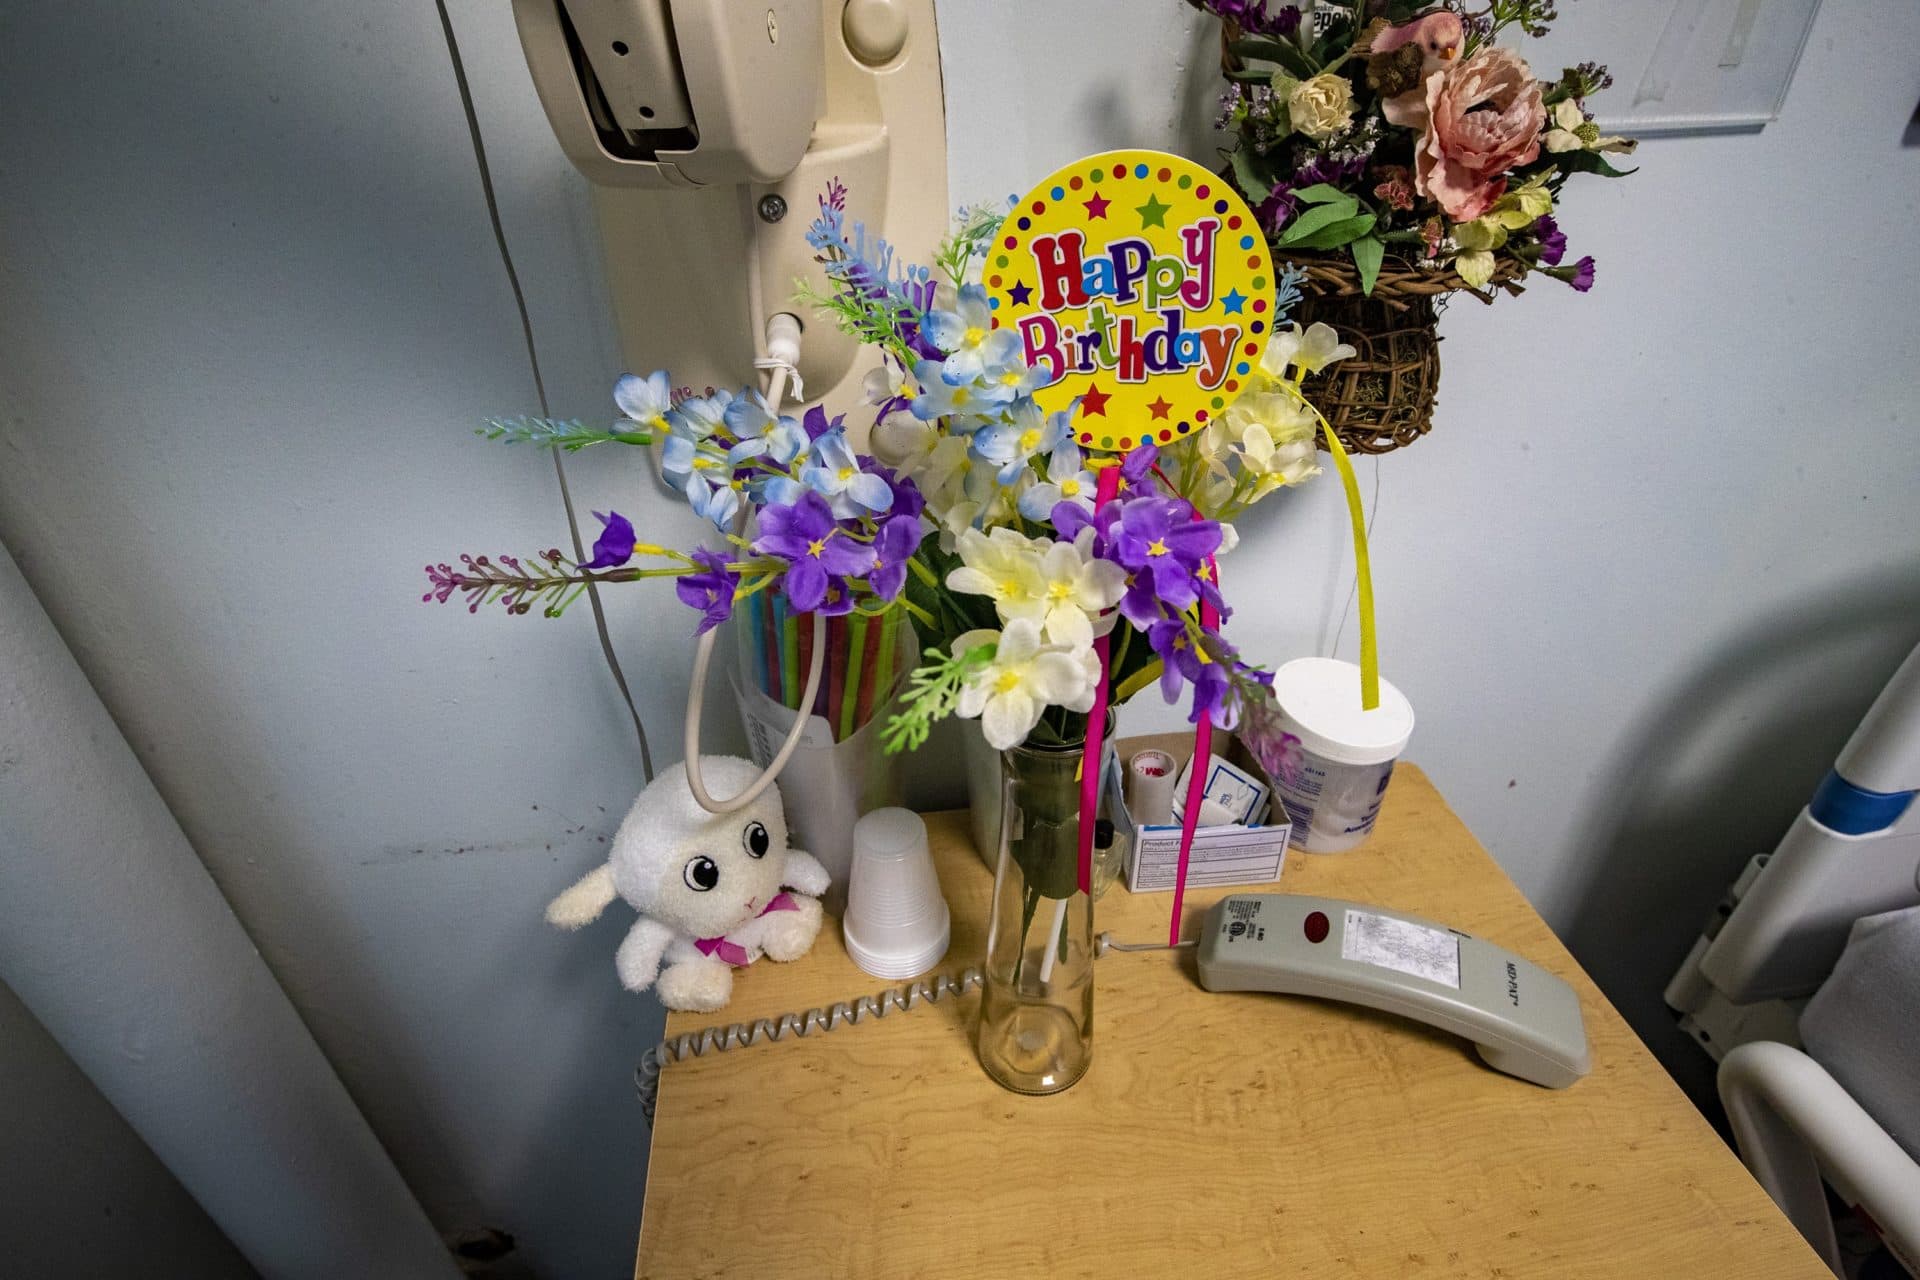 Nora Ketter received flowers for her 75th birthday in April, which was three years after she entered the hospital in Clinton. (Jesse Costa/WBUR)